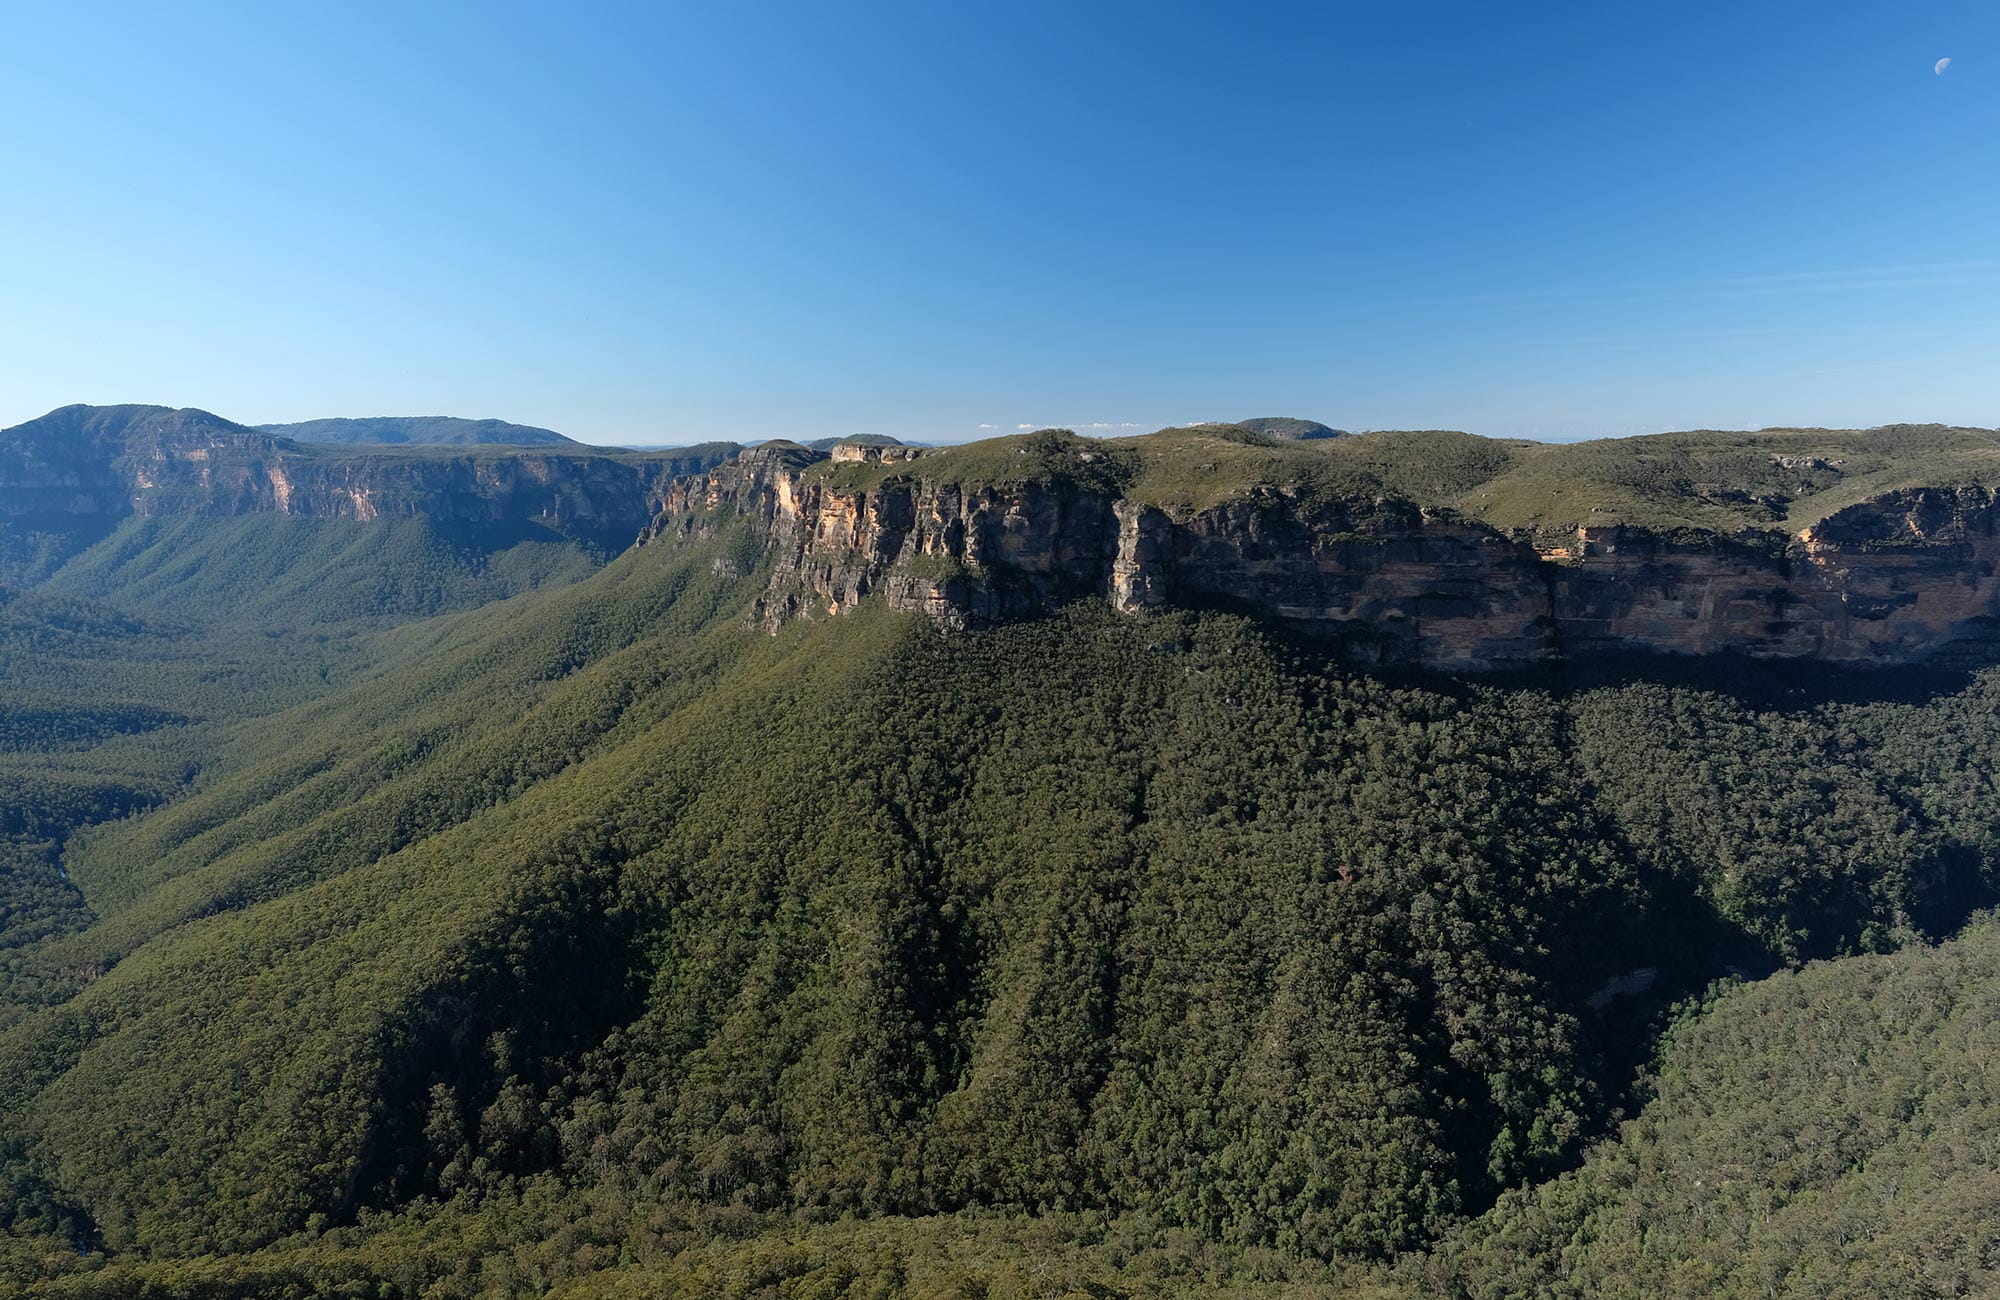 Views from Evans lookout, Blackheath, Blue Mountains National Park. Photo: E Sheargold/OEH.